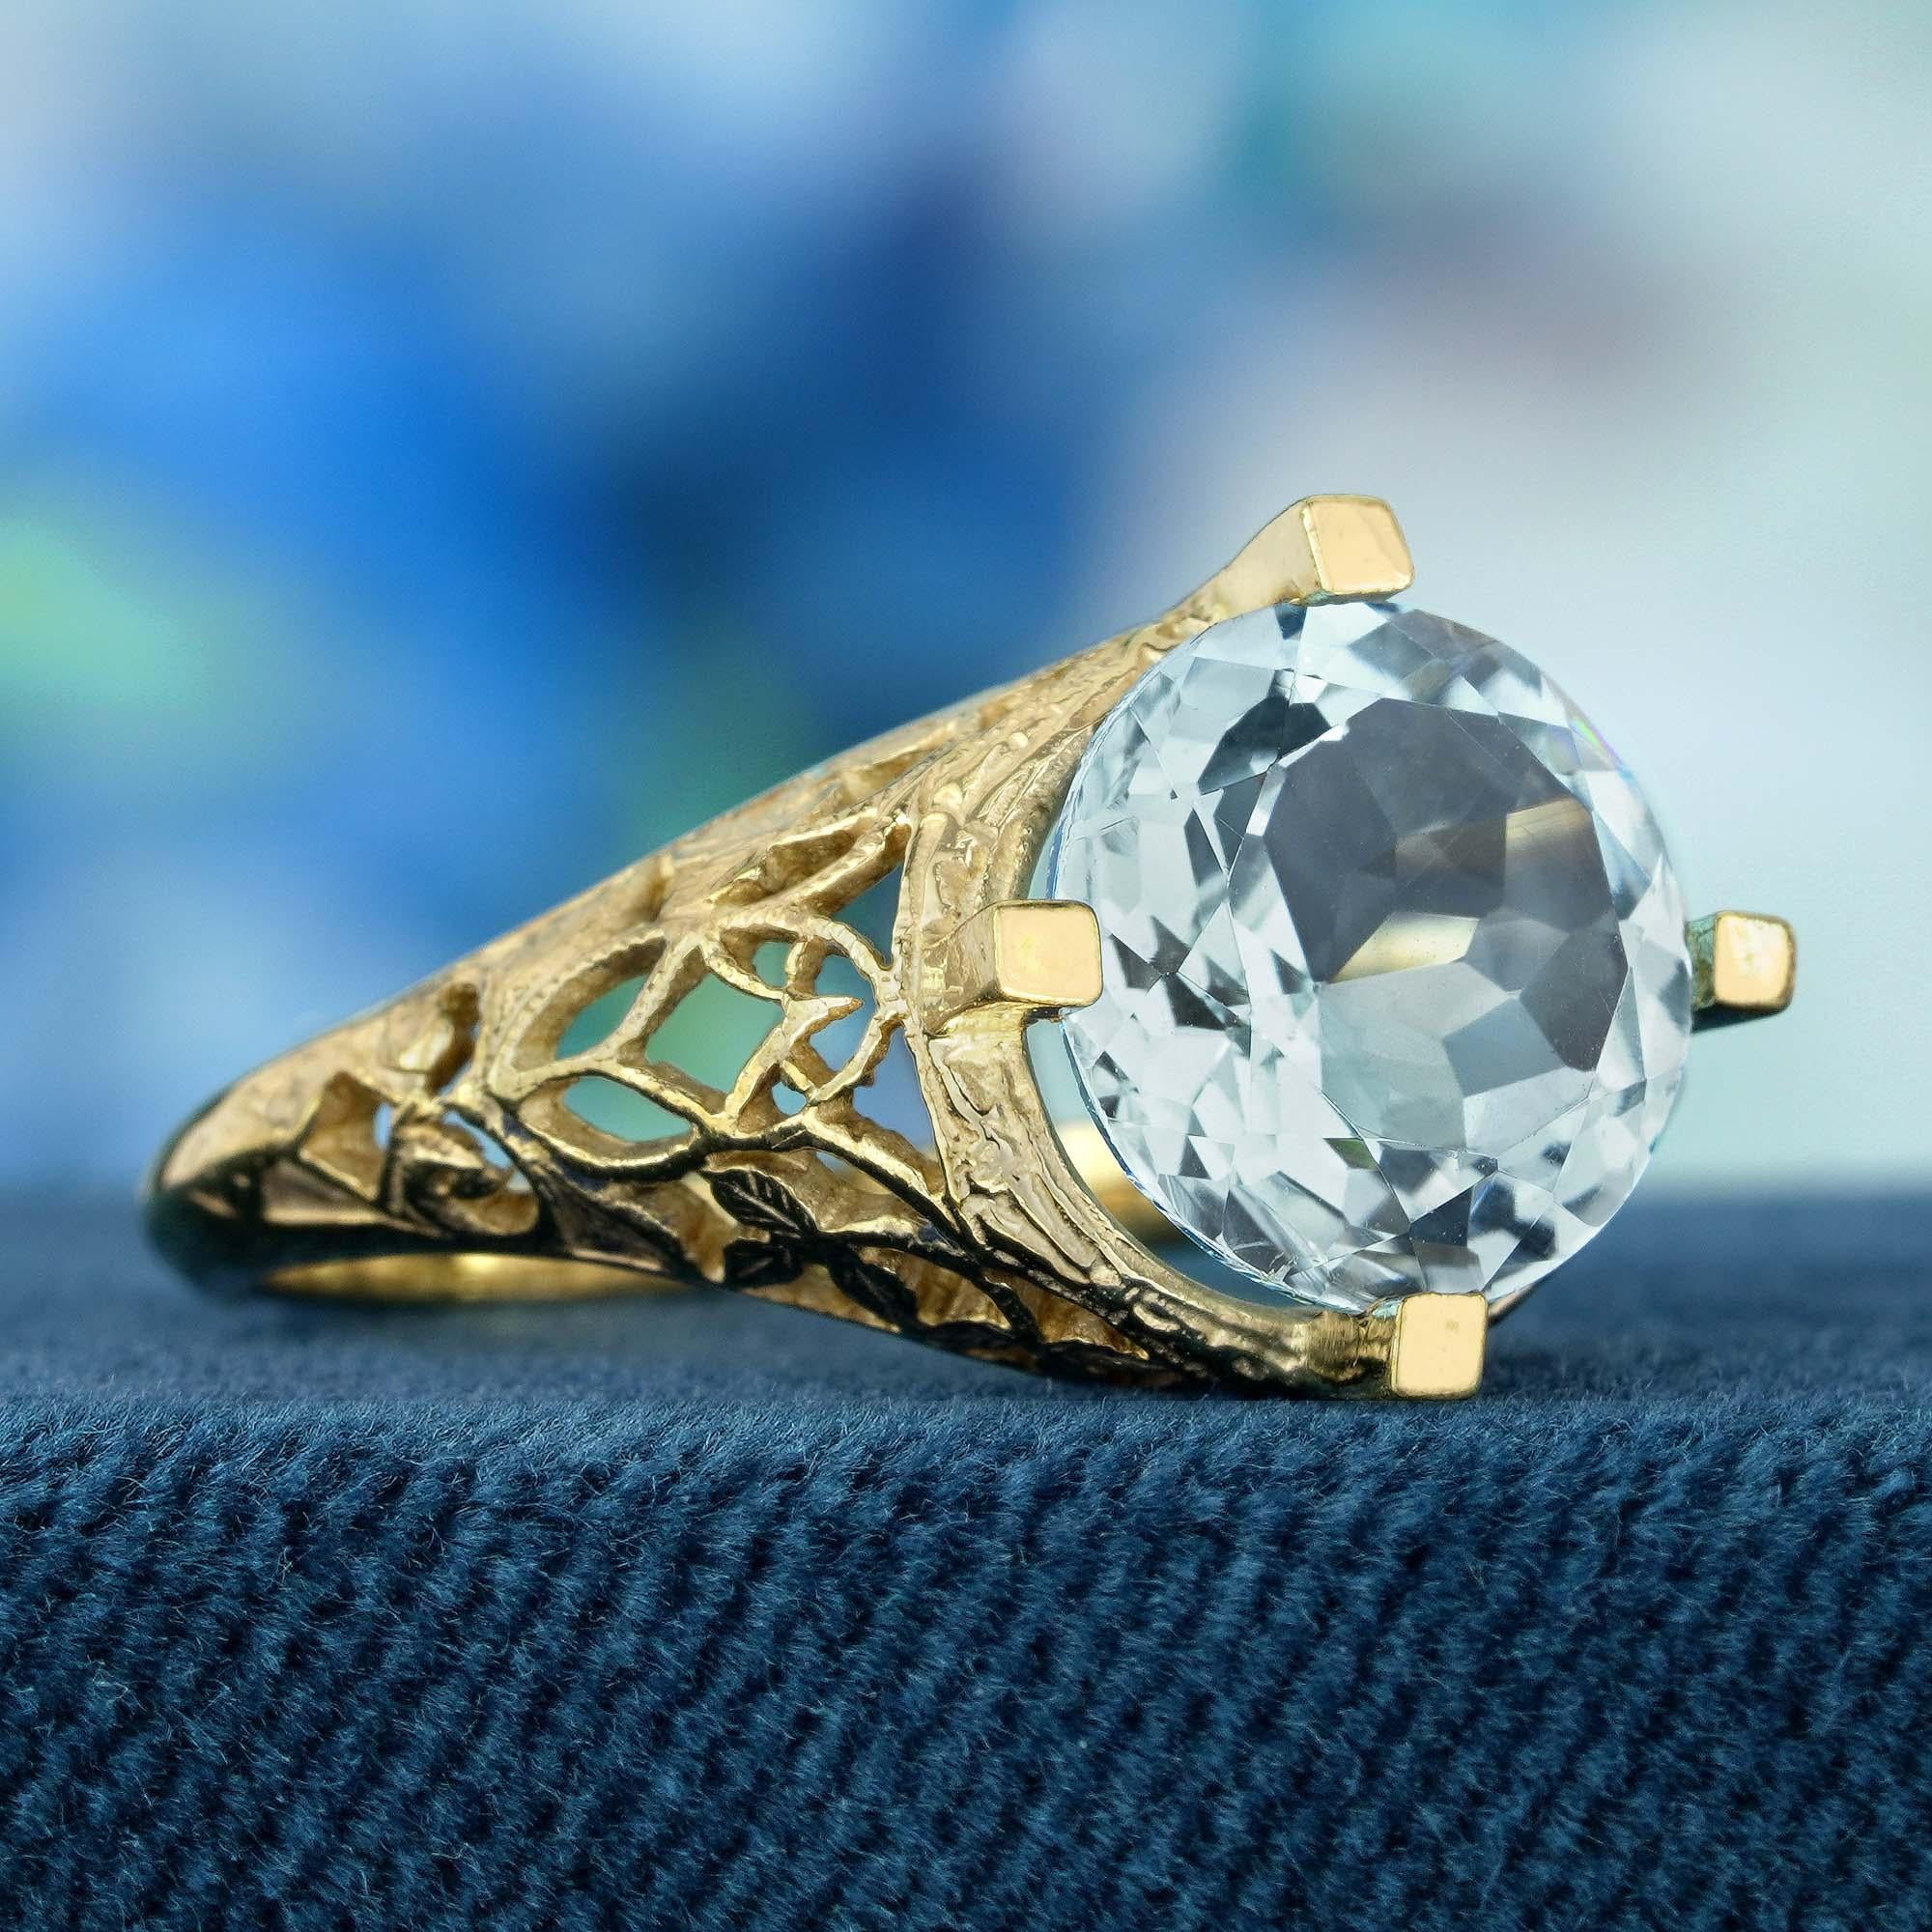 Capture the essence of the sky with our blue topaz vintage style filigree ring in yellow gold. Featuring a stunning round blue topaz stone in a serene sky blue hue, this ring radiates beauty and grace. Crafted with intricate filigree detailing, it